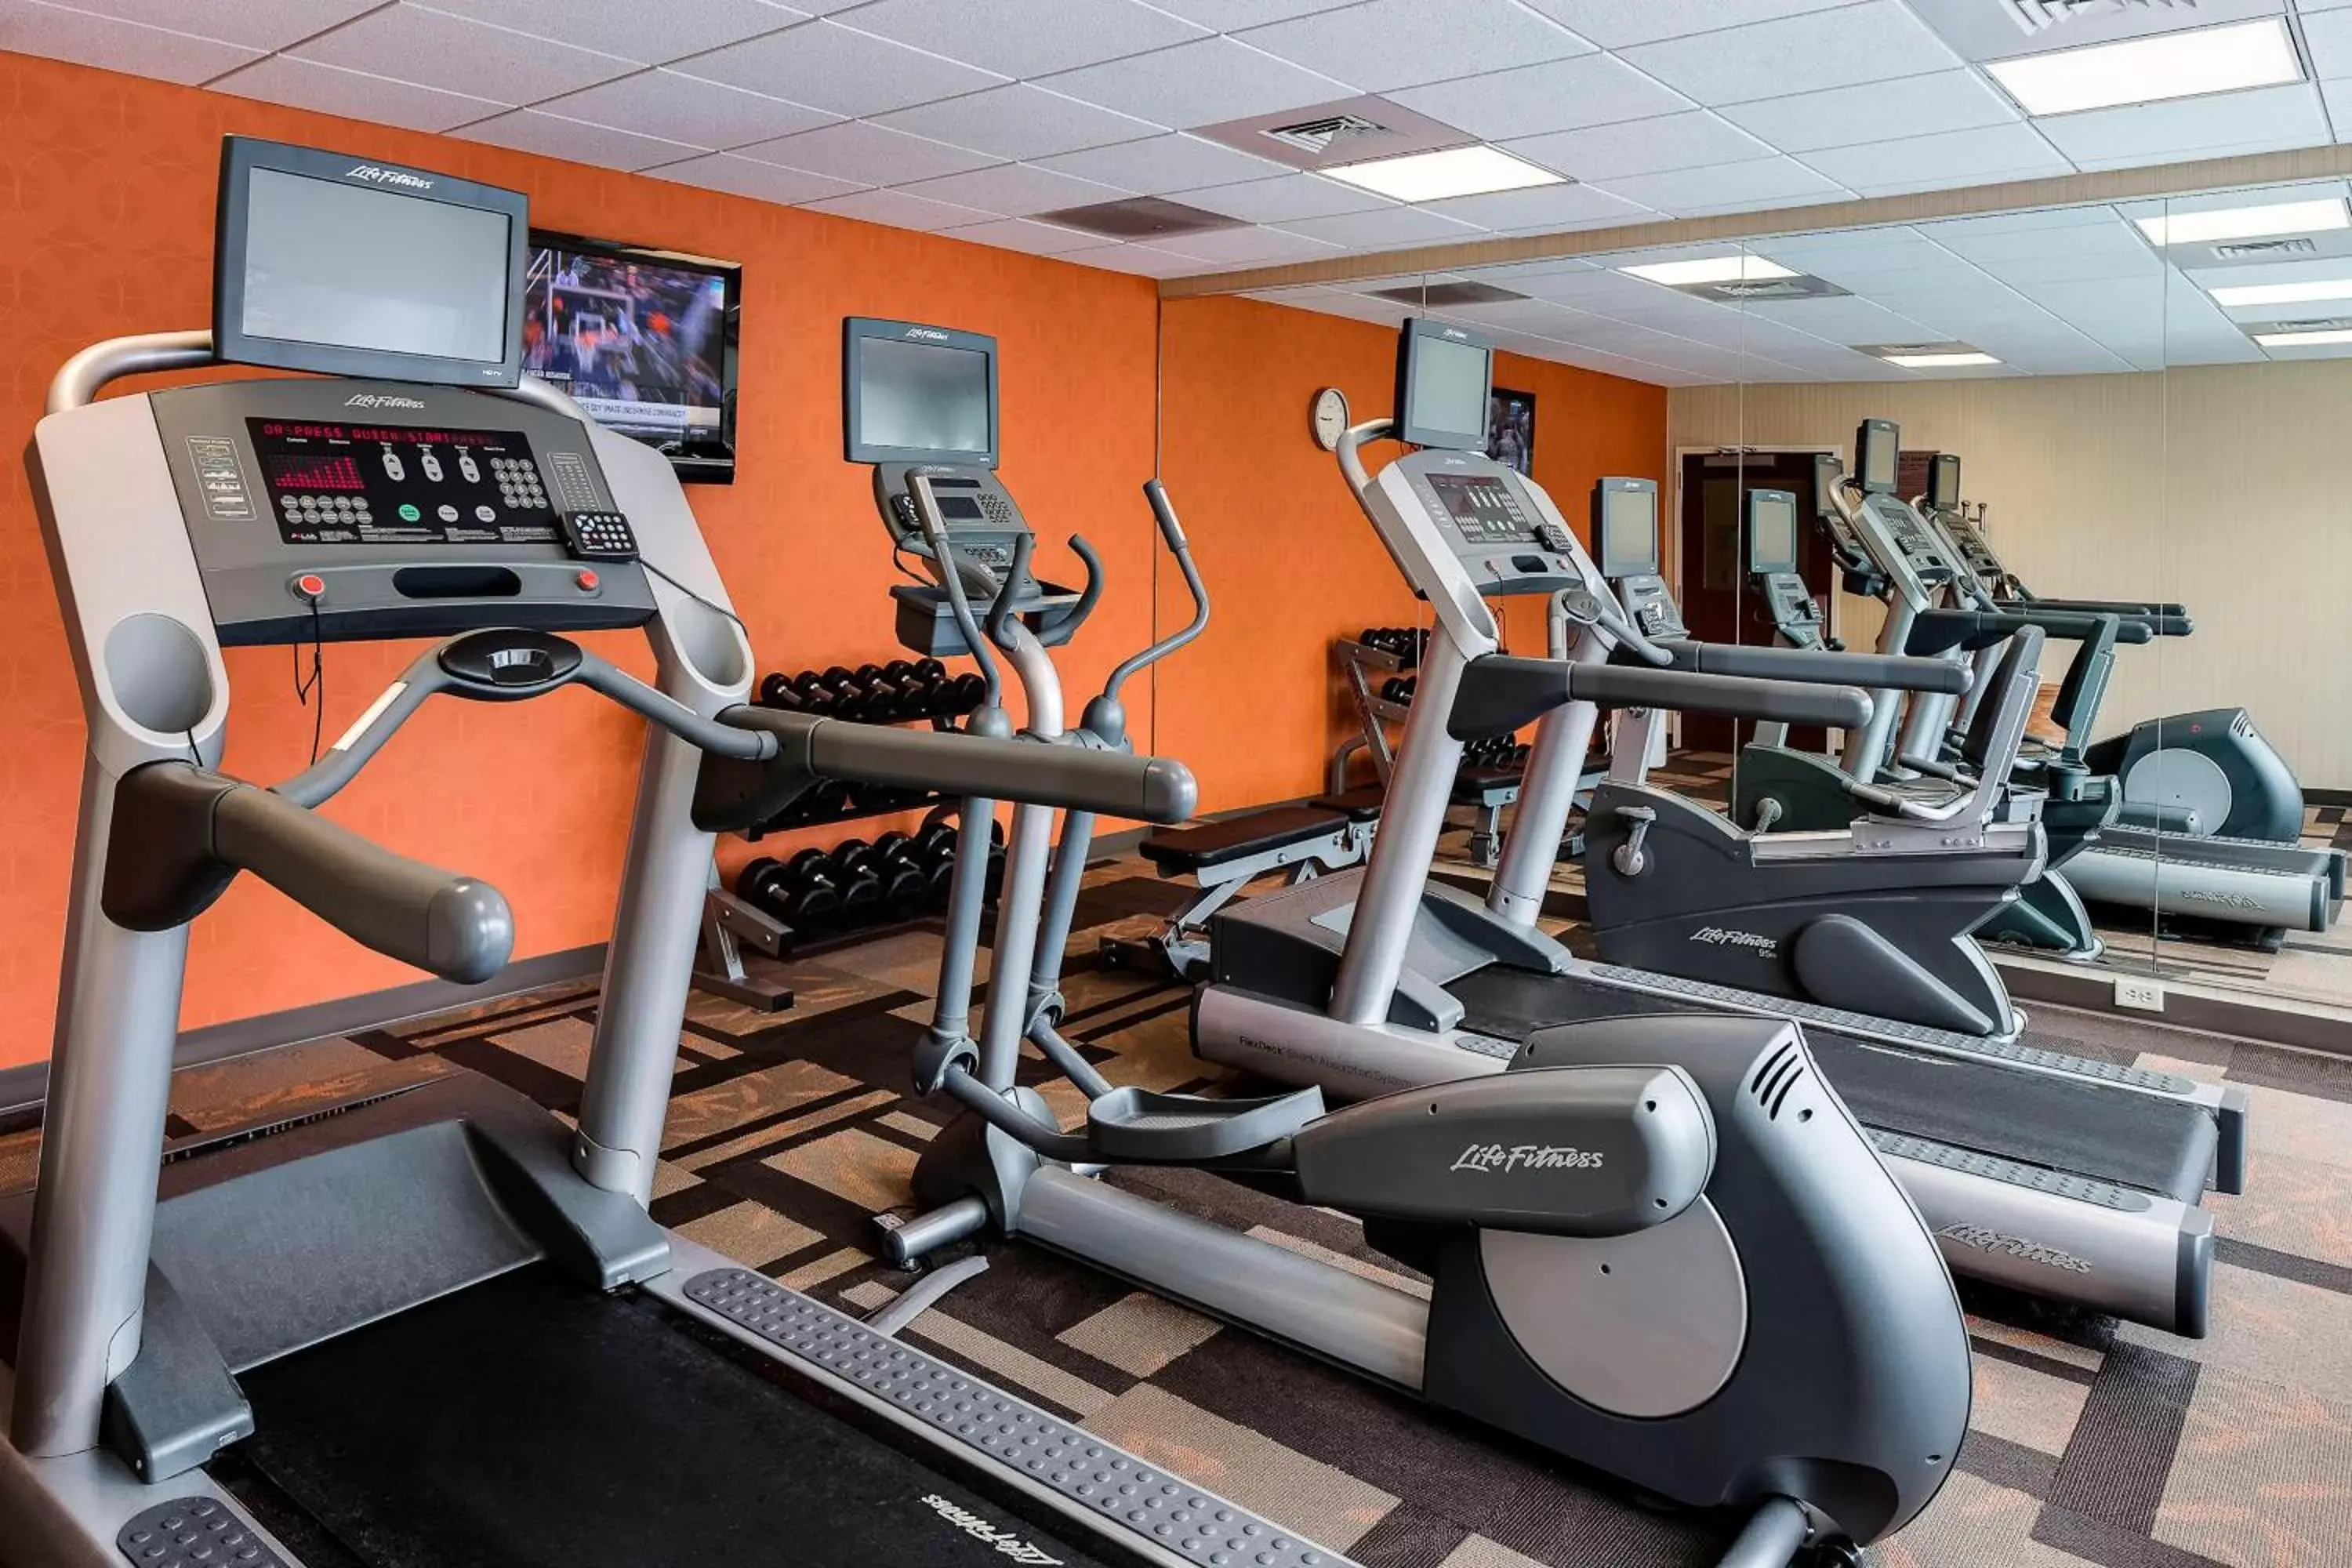 Fitness centre/facilities, Fitness Center/Facilities in Courtyard Des Moines Ankeny